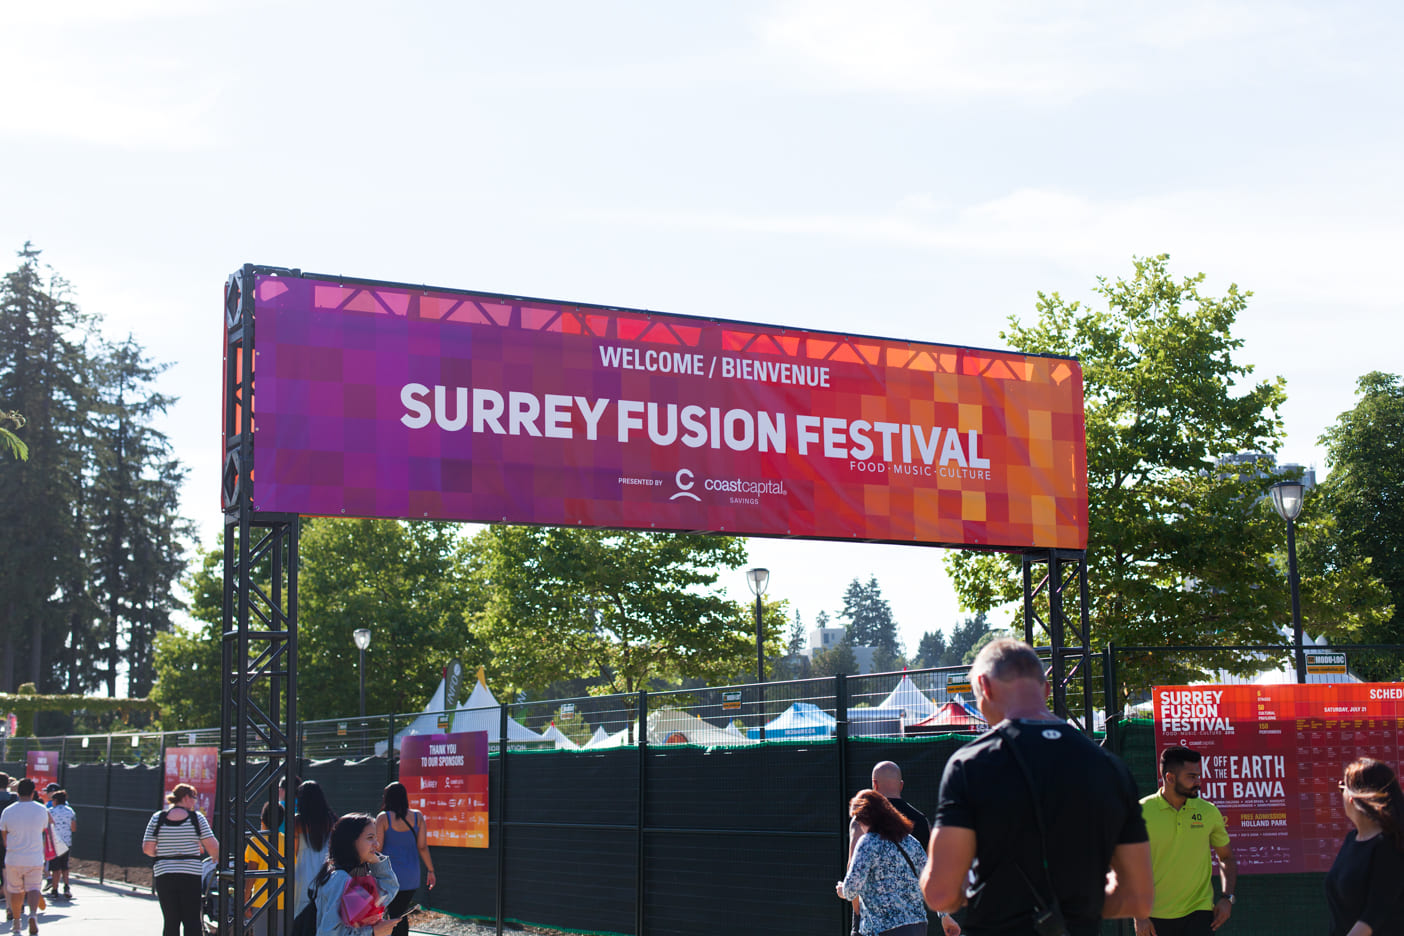 Surrey Fusion Festival outside welcome banner